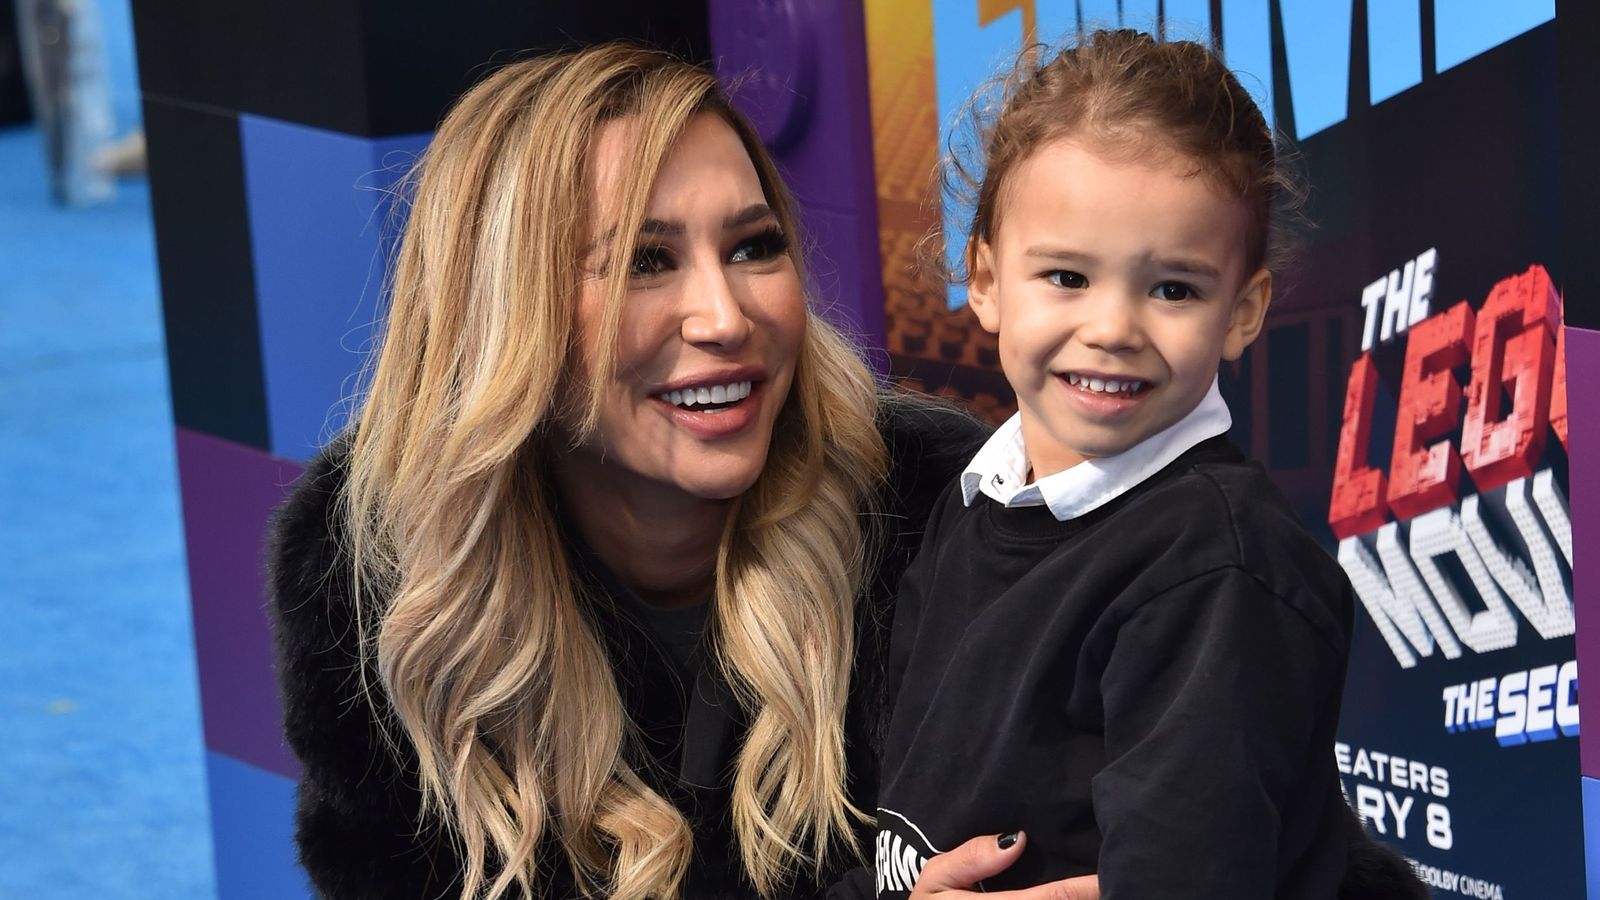 US actress Naya Rivera and son Josey Hollis arrive for the premiere of "The Lego Movie 2: The Second Part" at the Regency Village theatre on February 2, 2019 in Westwood, California